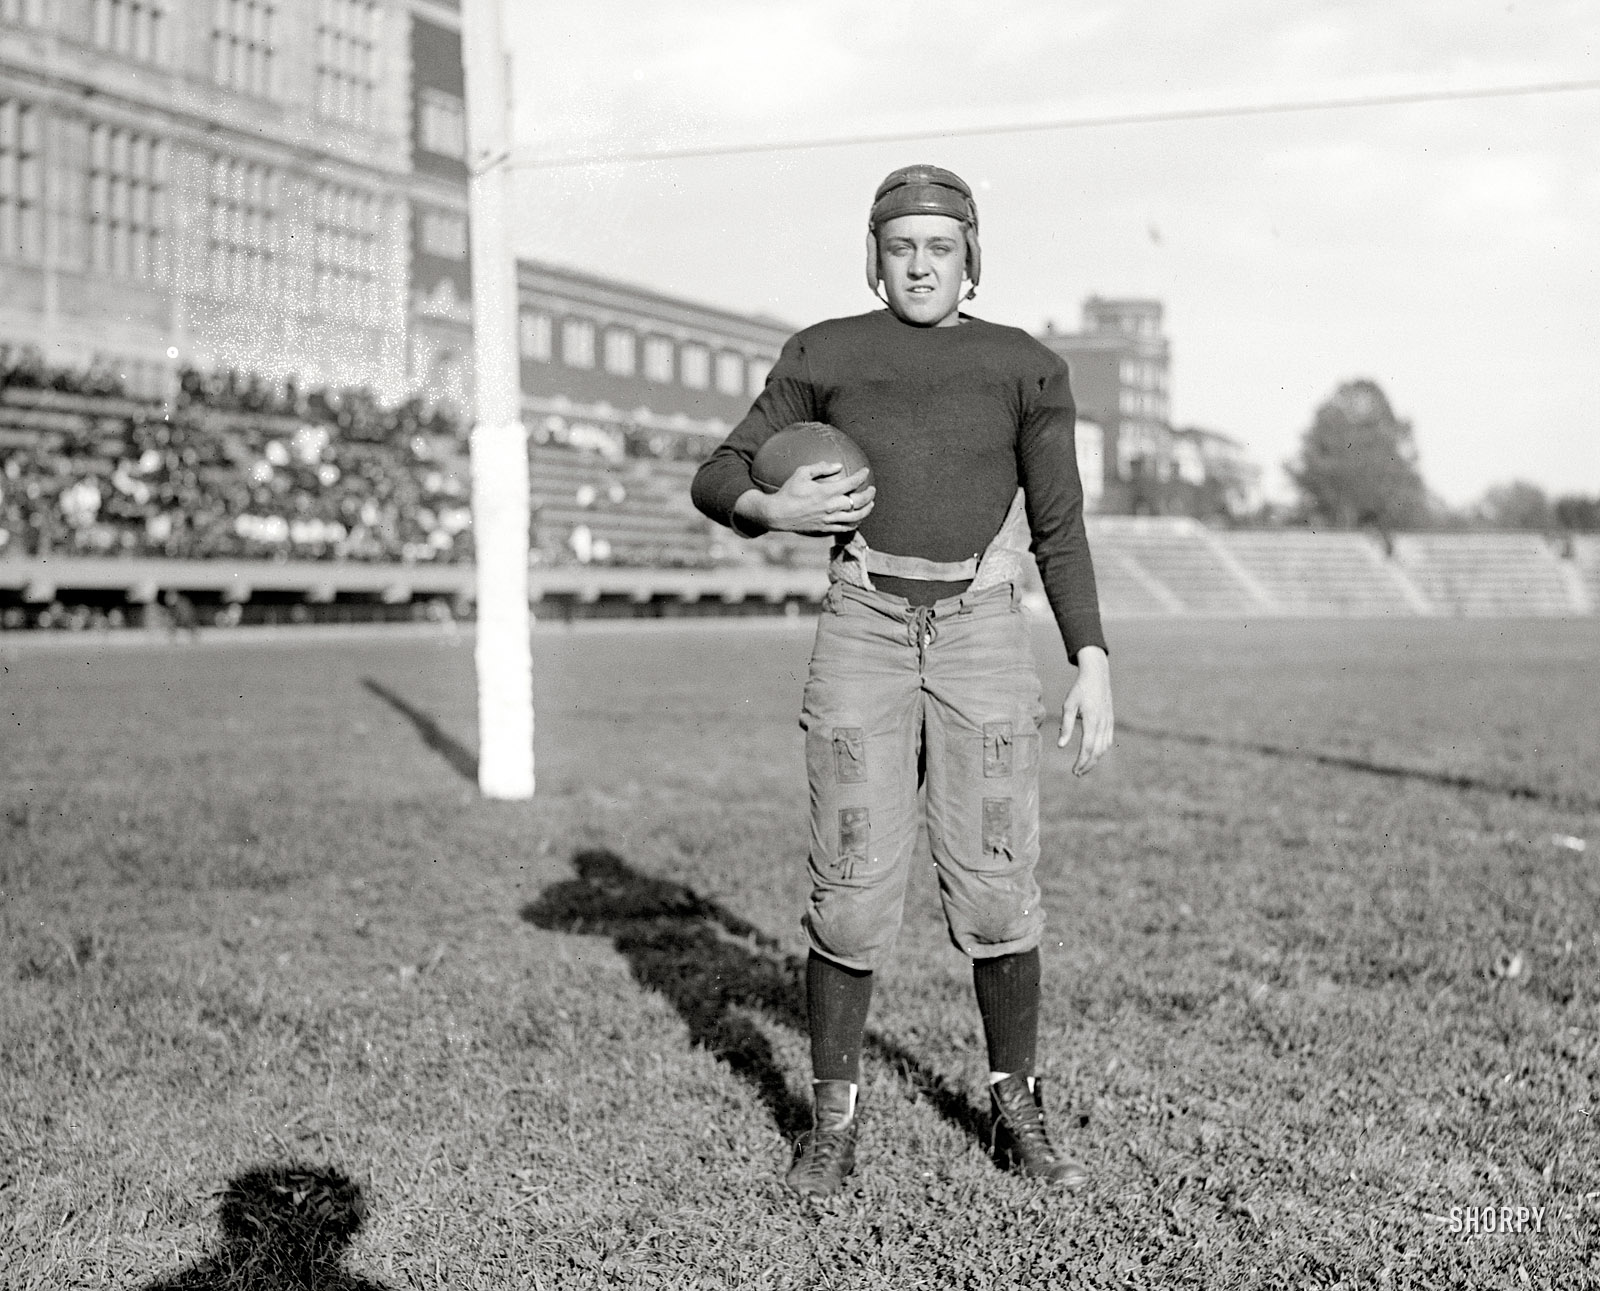 Washington, D.C., circa 1919. "Jack Dawson, Western High." On the field at Central. National Photo Company Collection glass negative. View full size.